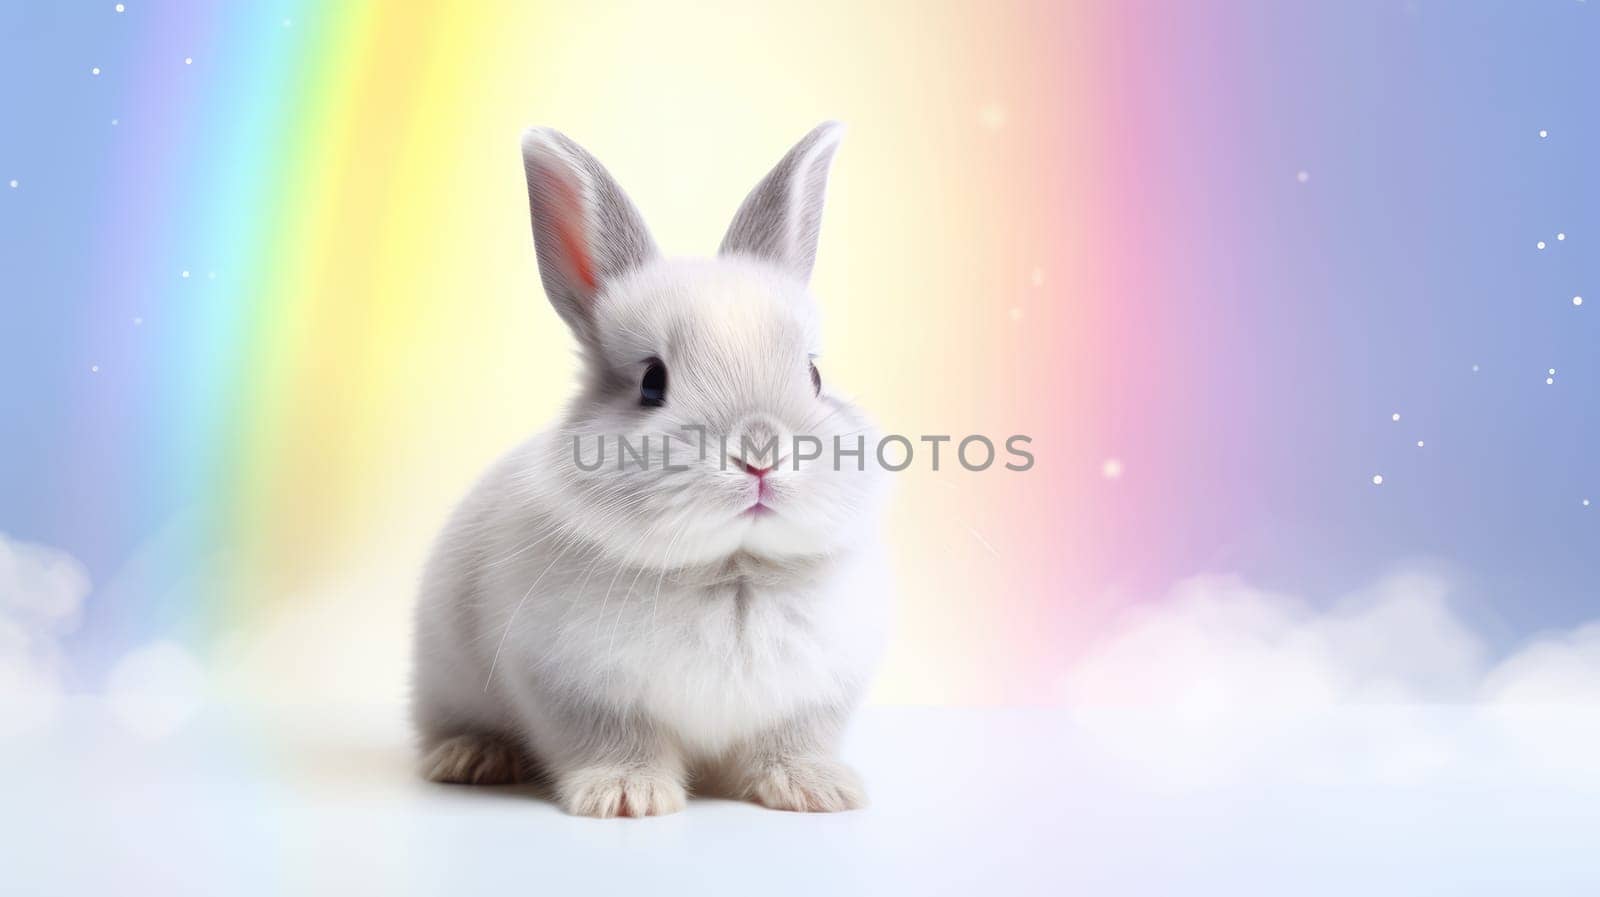 A fluffy white bunny with soft fur and adorable deep blue eyes, set against a vibrant pastel rainbow background. Perfect for childrens books, Easter themes, and whimsical designs.